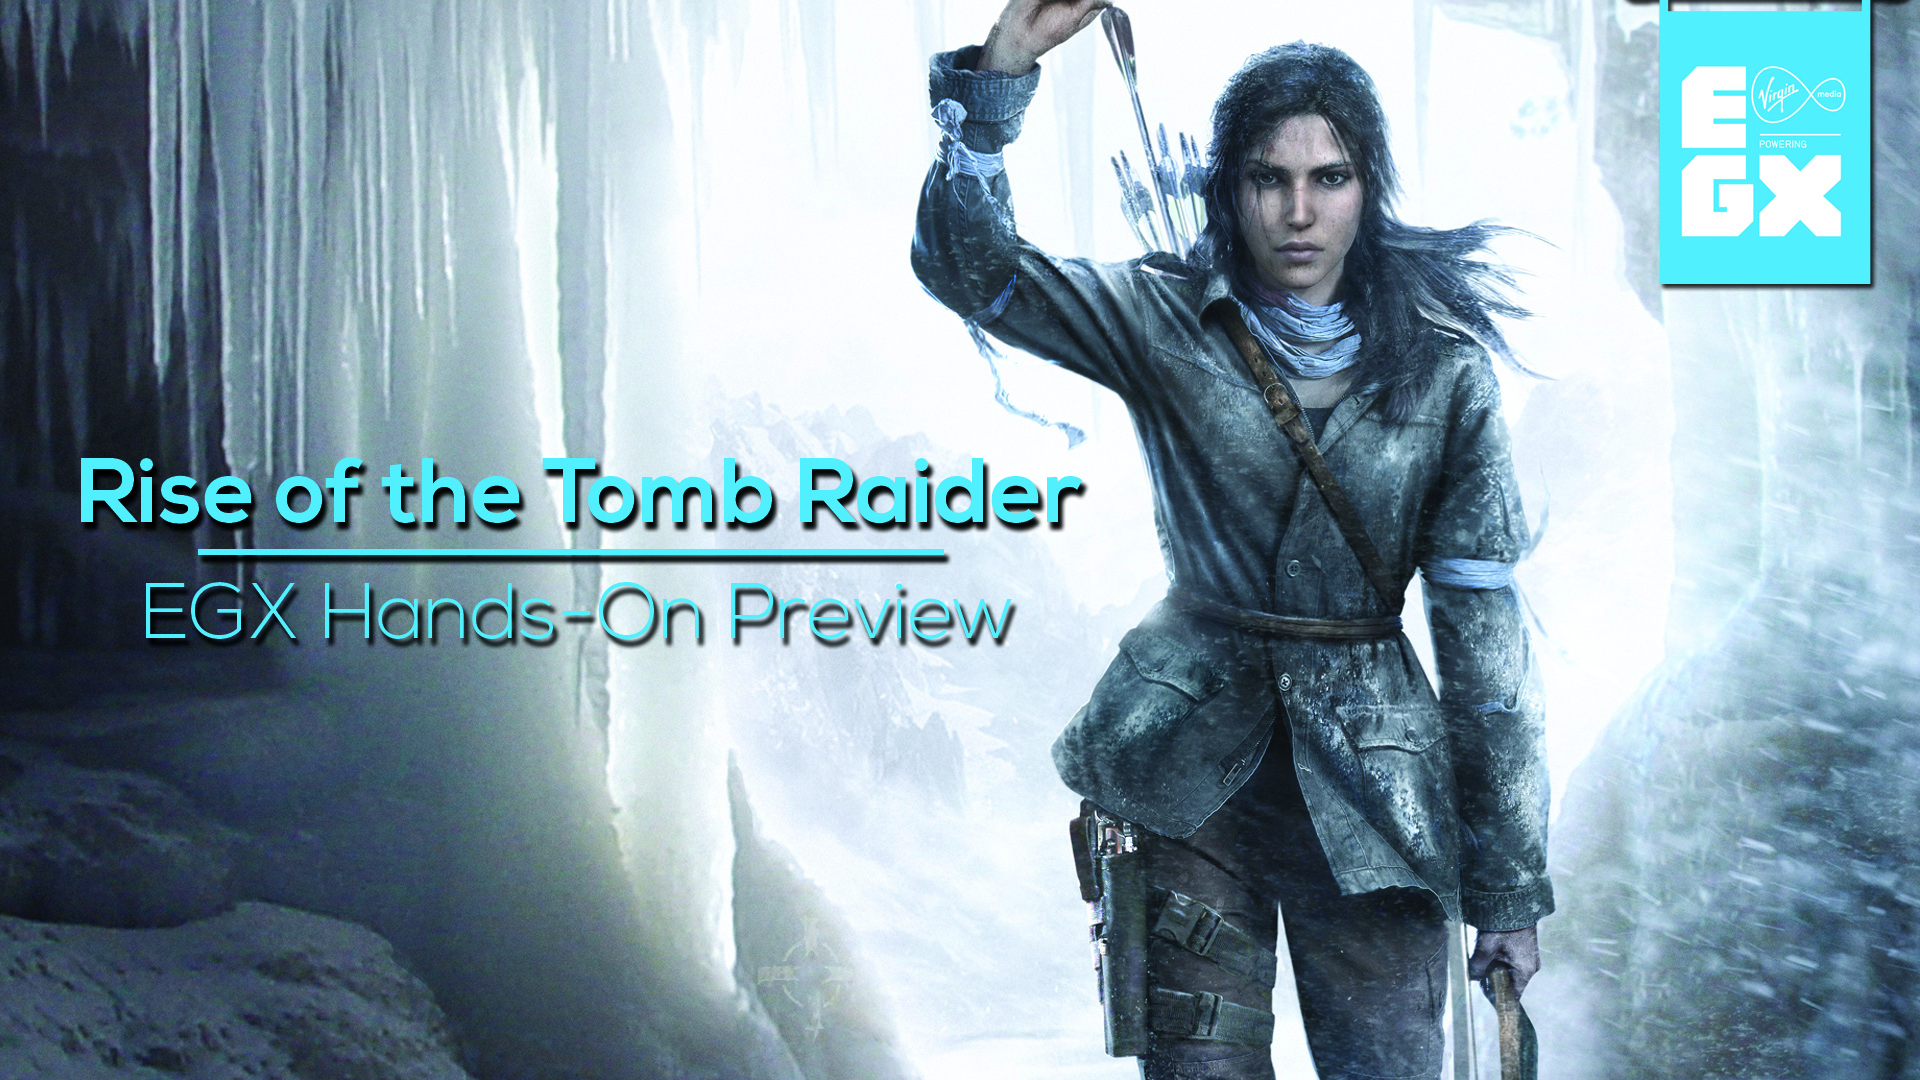 Rise of the Tomb Raider (Hands-On Preview)